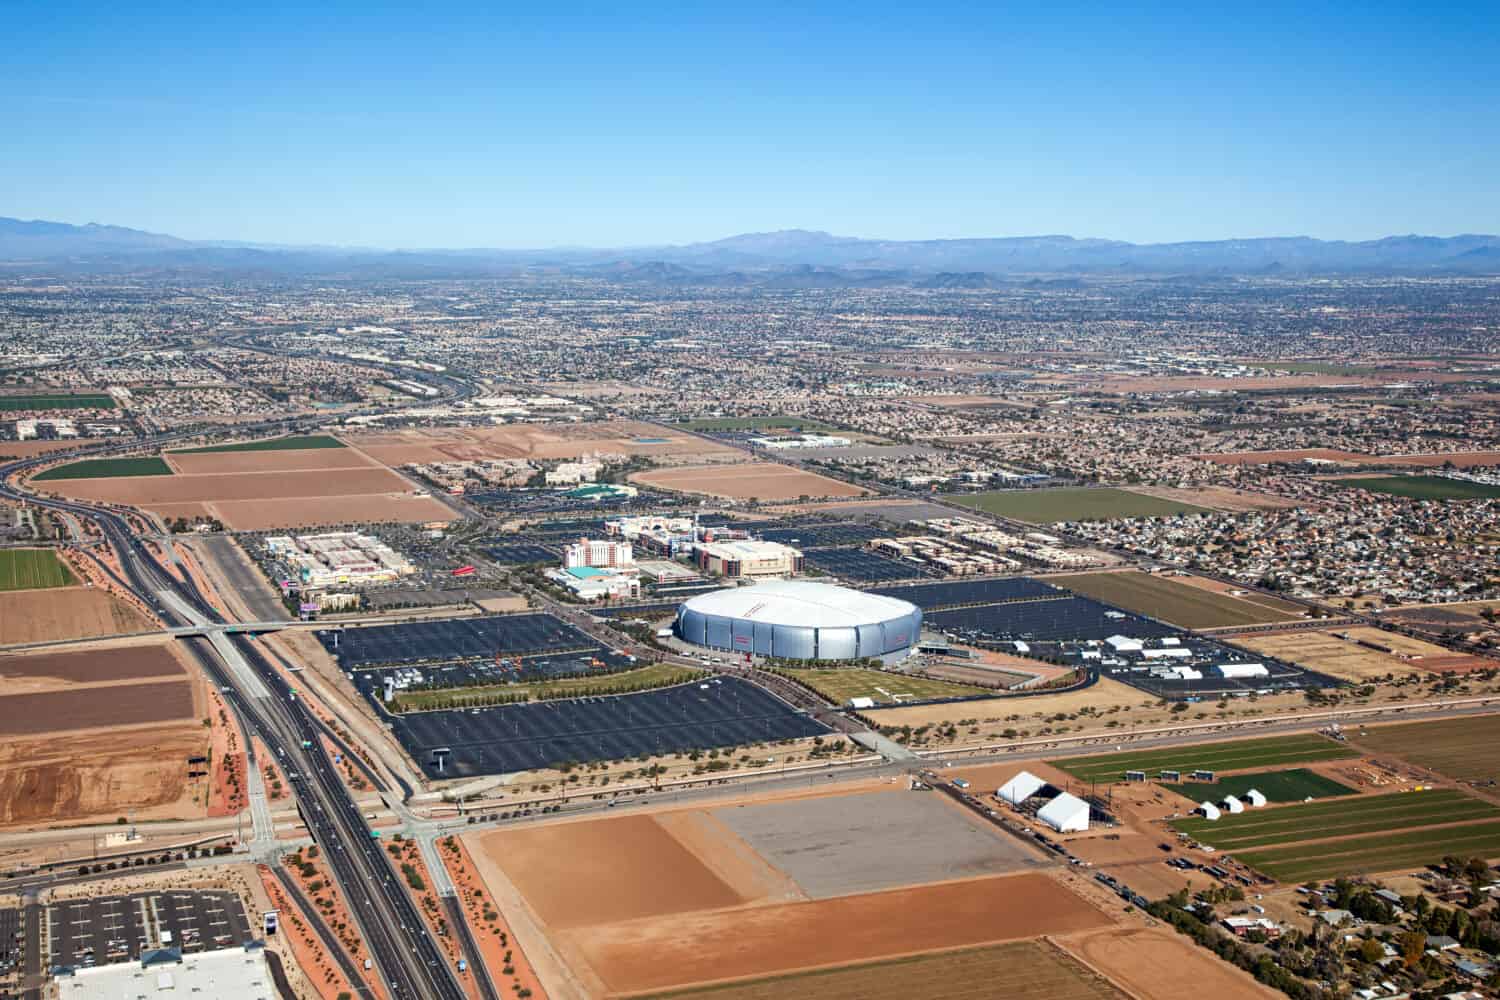 Glendale, Arizona sports and mixed use venues from above